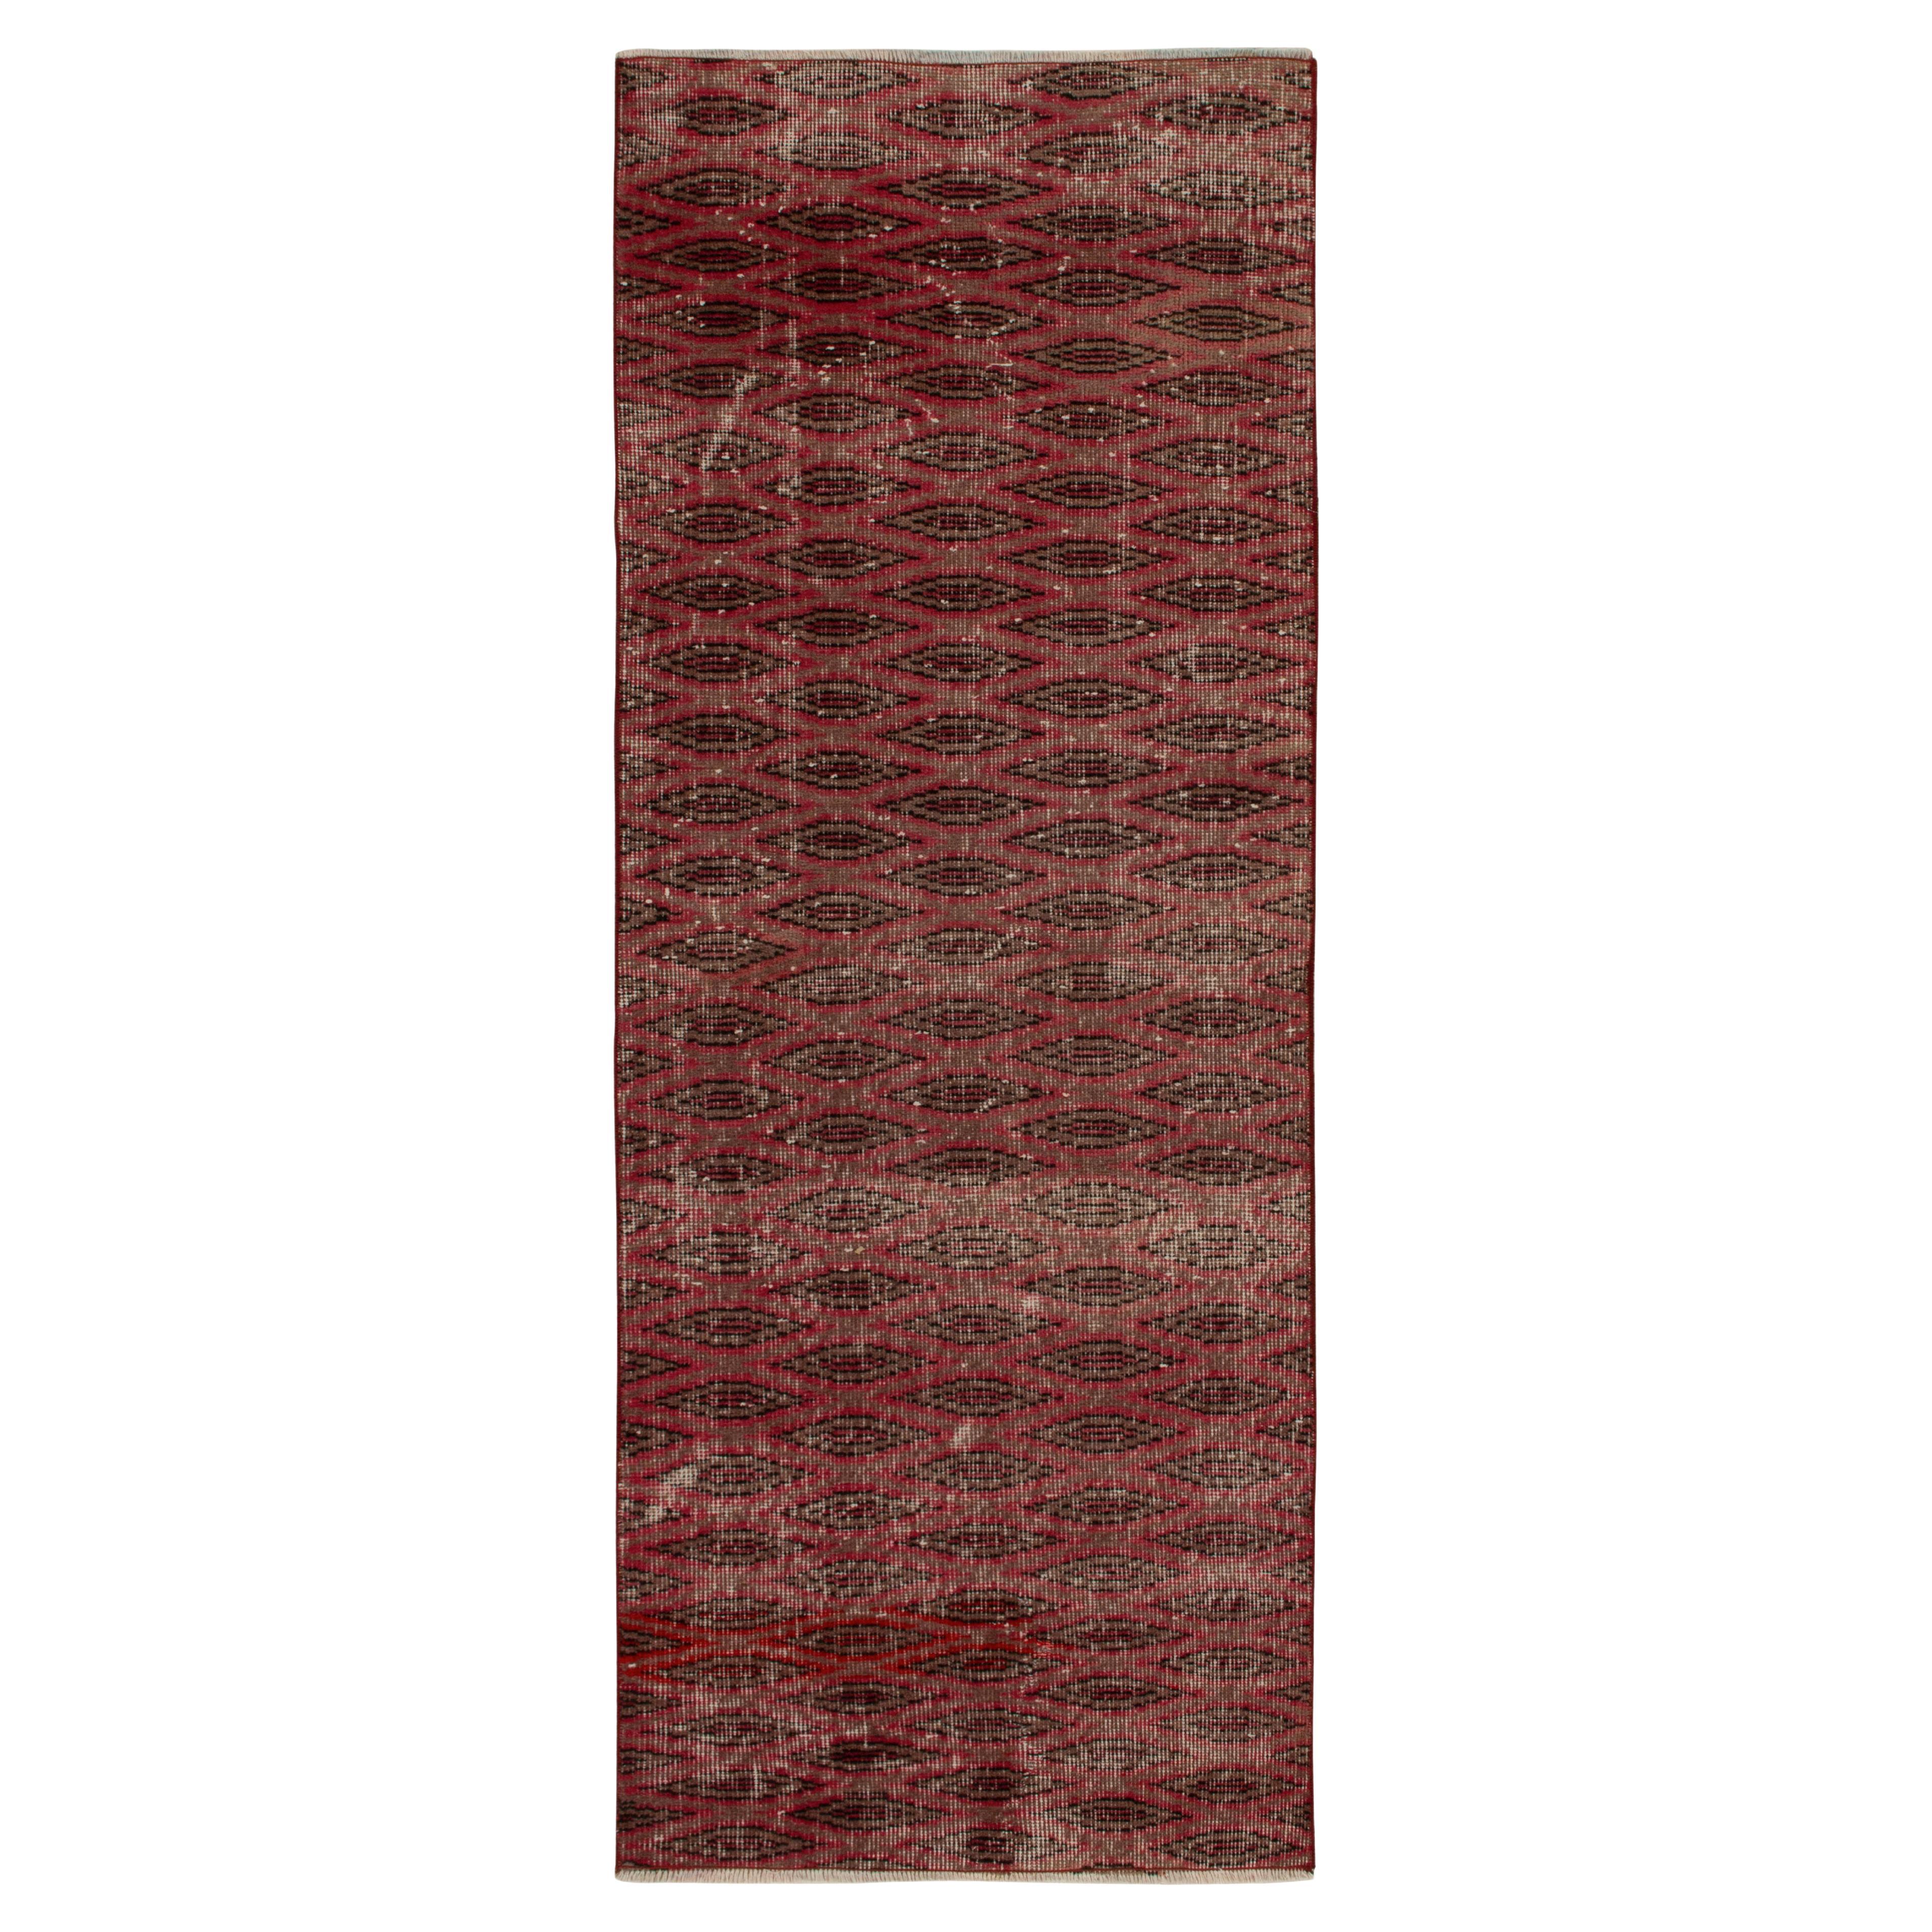 1960s Vintage Art Deco Runner in Red and Brown Geometric Pattern, by Rug & Kilim For Sale